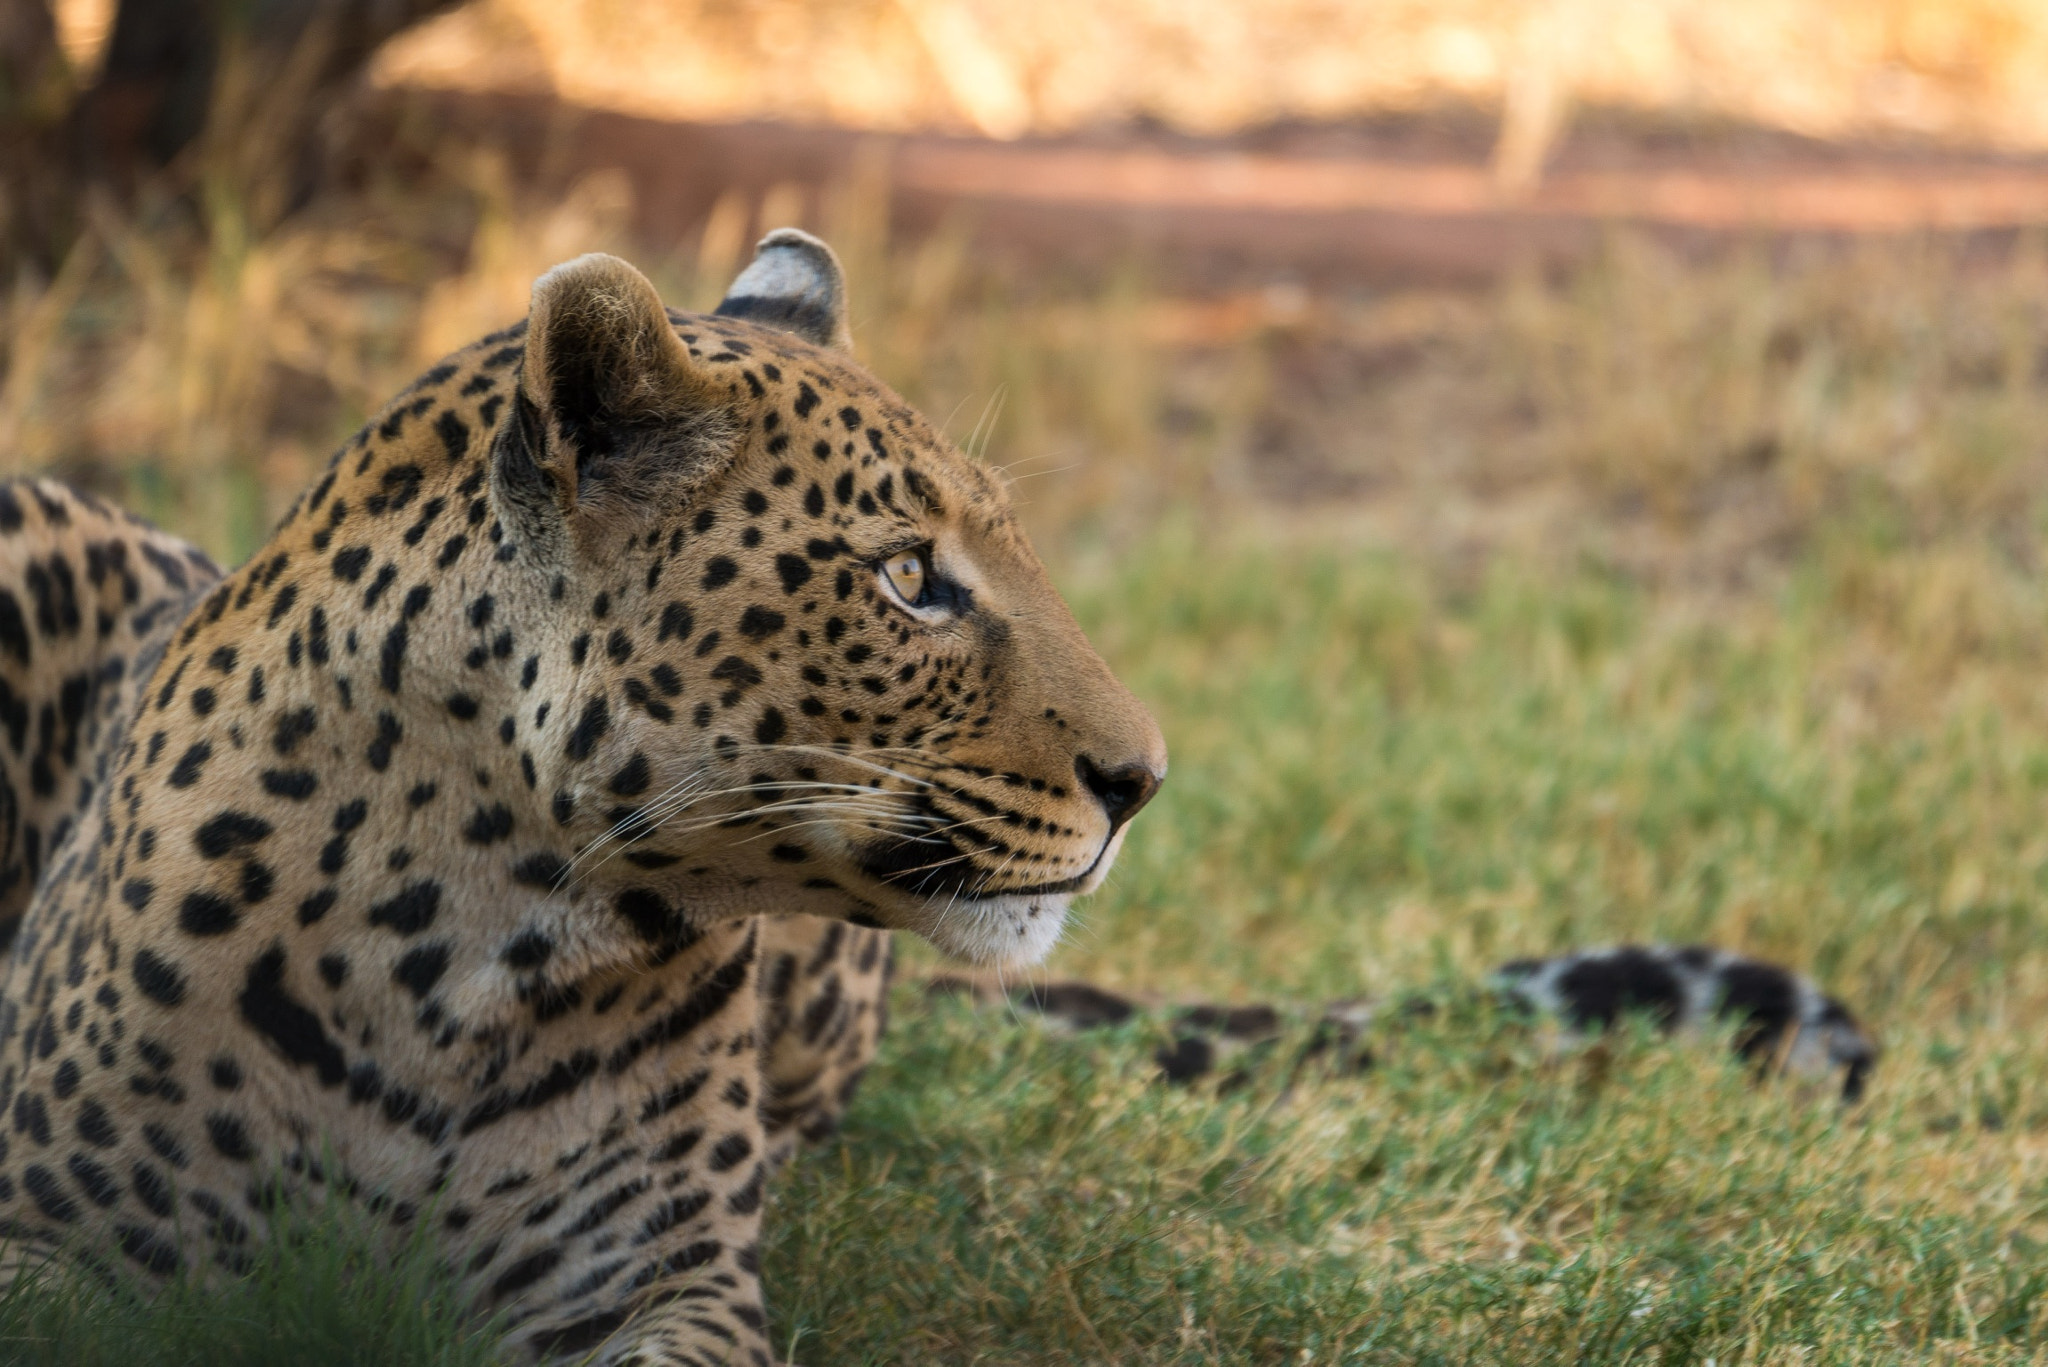 Sony a6300 sample photo. Wahu the leopard photography